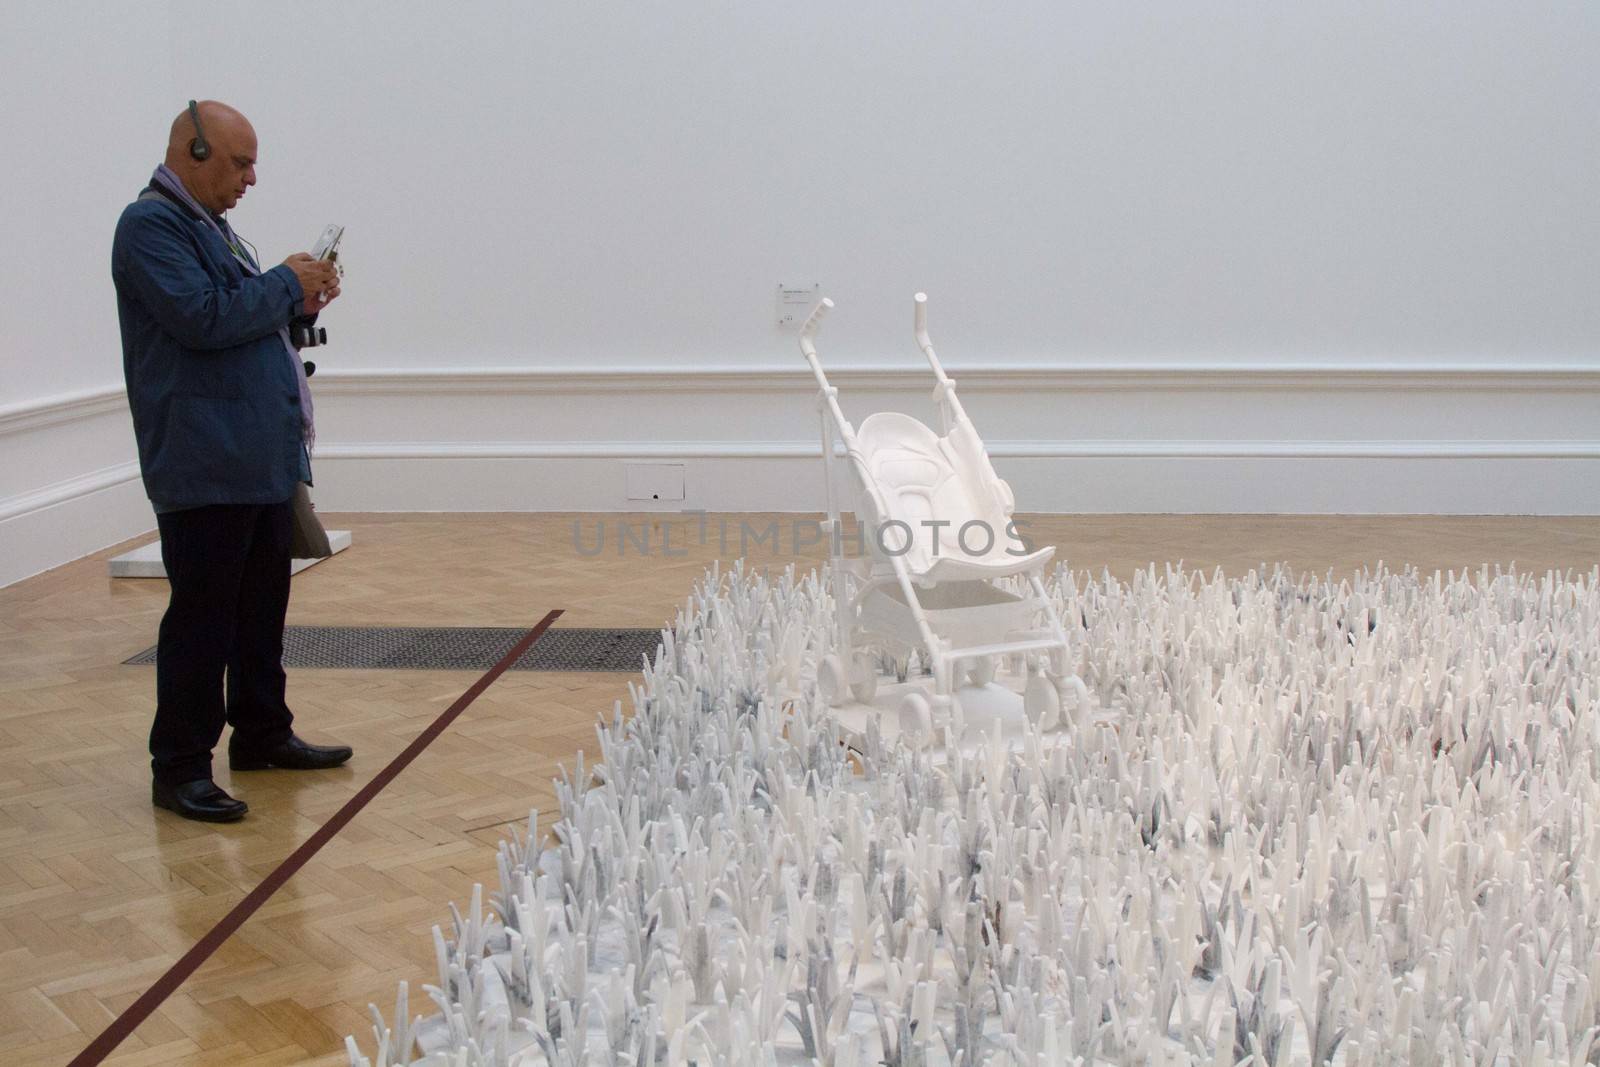 UK, London: Marble lawn by Chinese artist Ai Weiwei, in his new exhibition at the Royal Academy in London, on September 15, 2015. 	The show opens to the public on September 19 and has been hailed by critics as his best ever exhbition. Works include a six-part diorama called 'Sacred' depicting his arrest, painted vases, and a security camera made from marble.